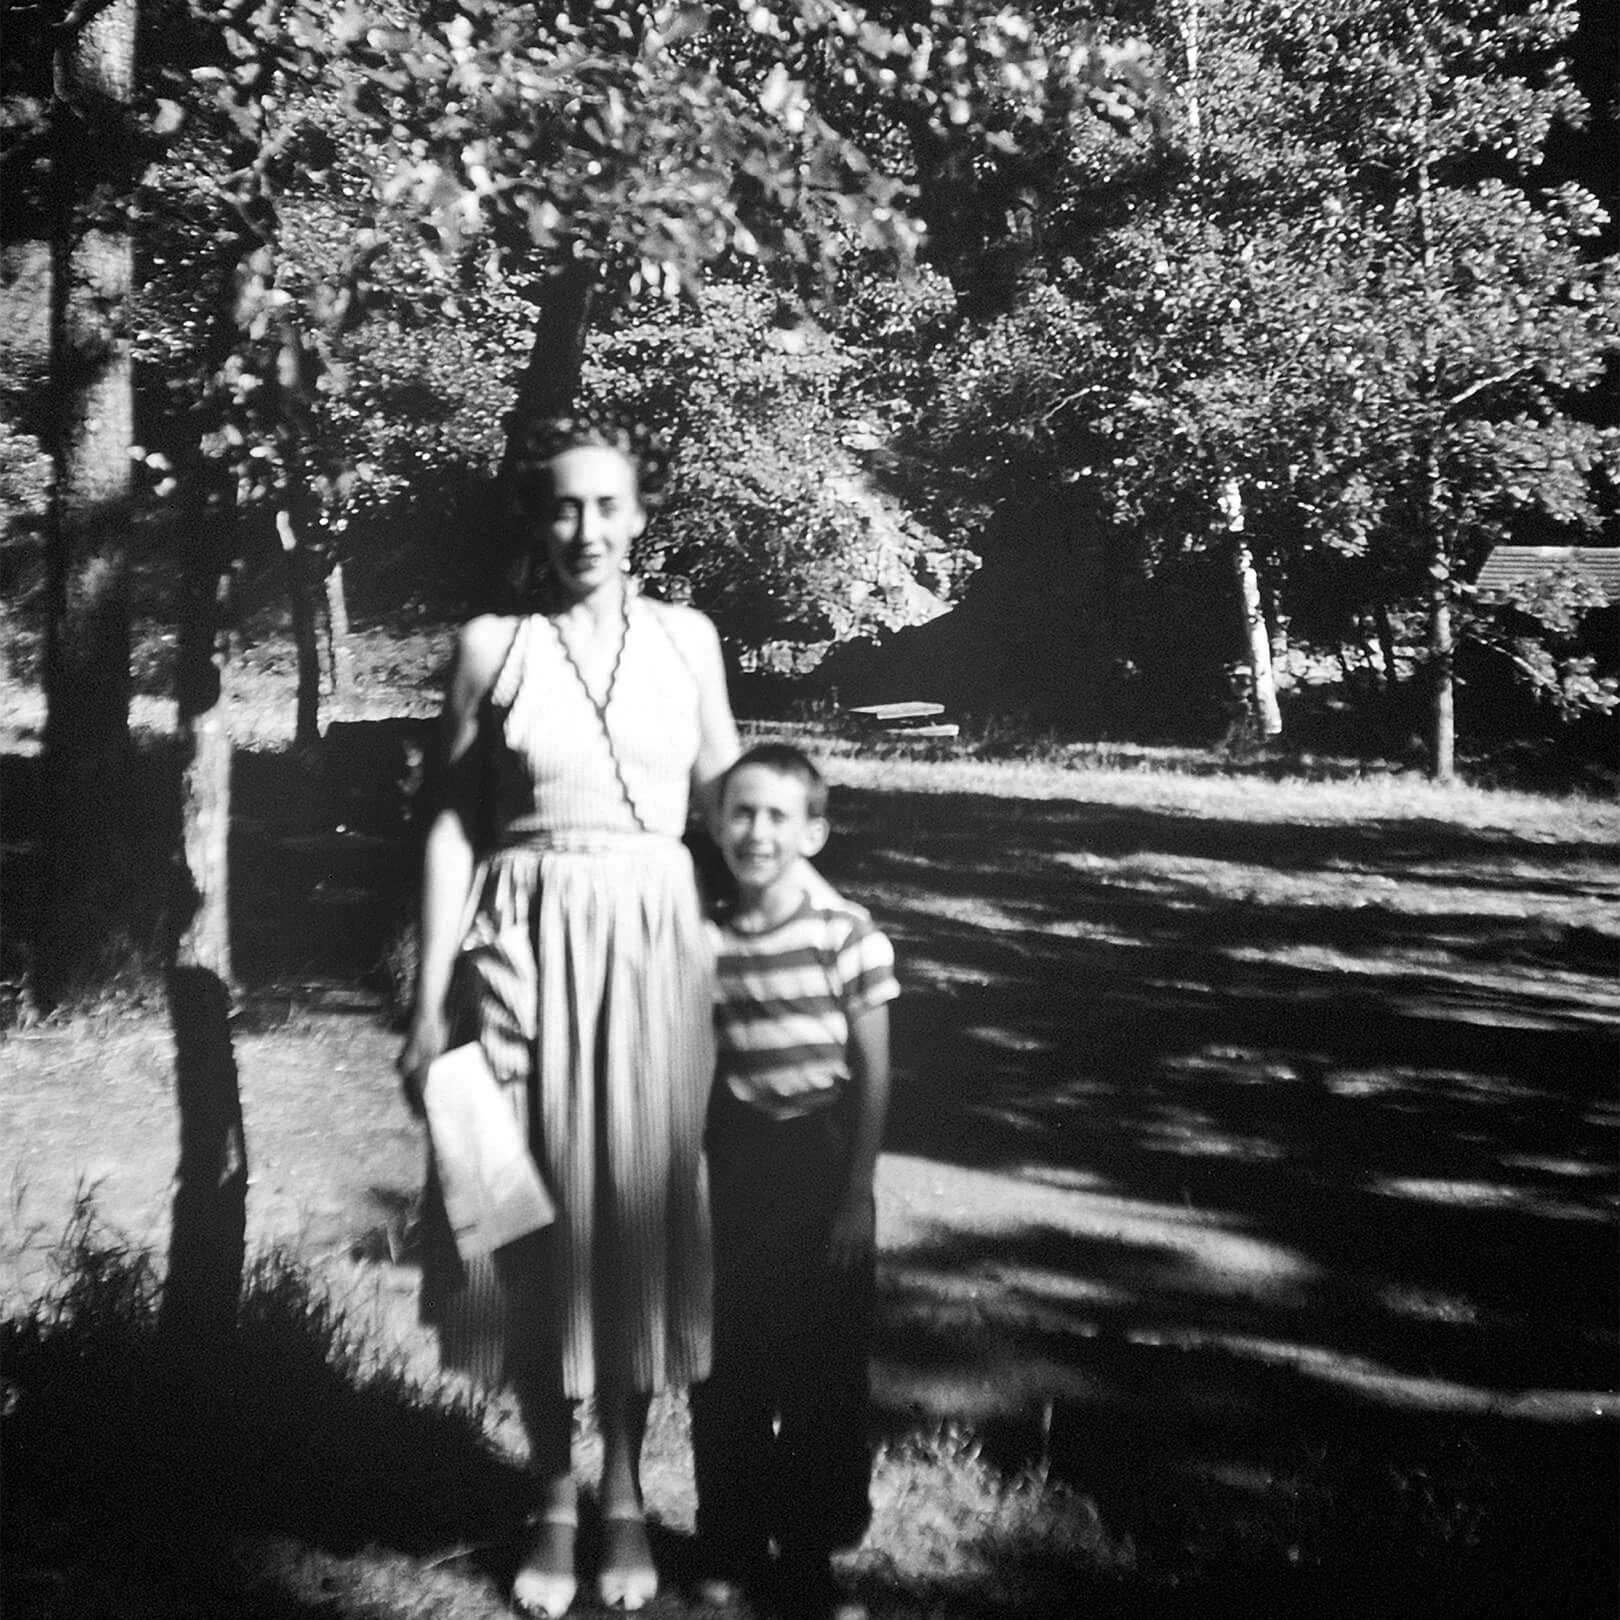 Black and white photo of a woman in a dress standing with a young boy.  They are standing outside in a yard.